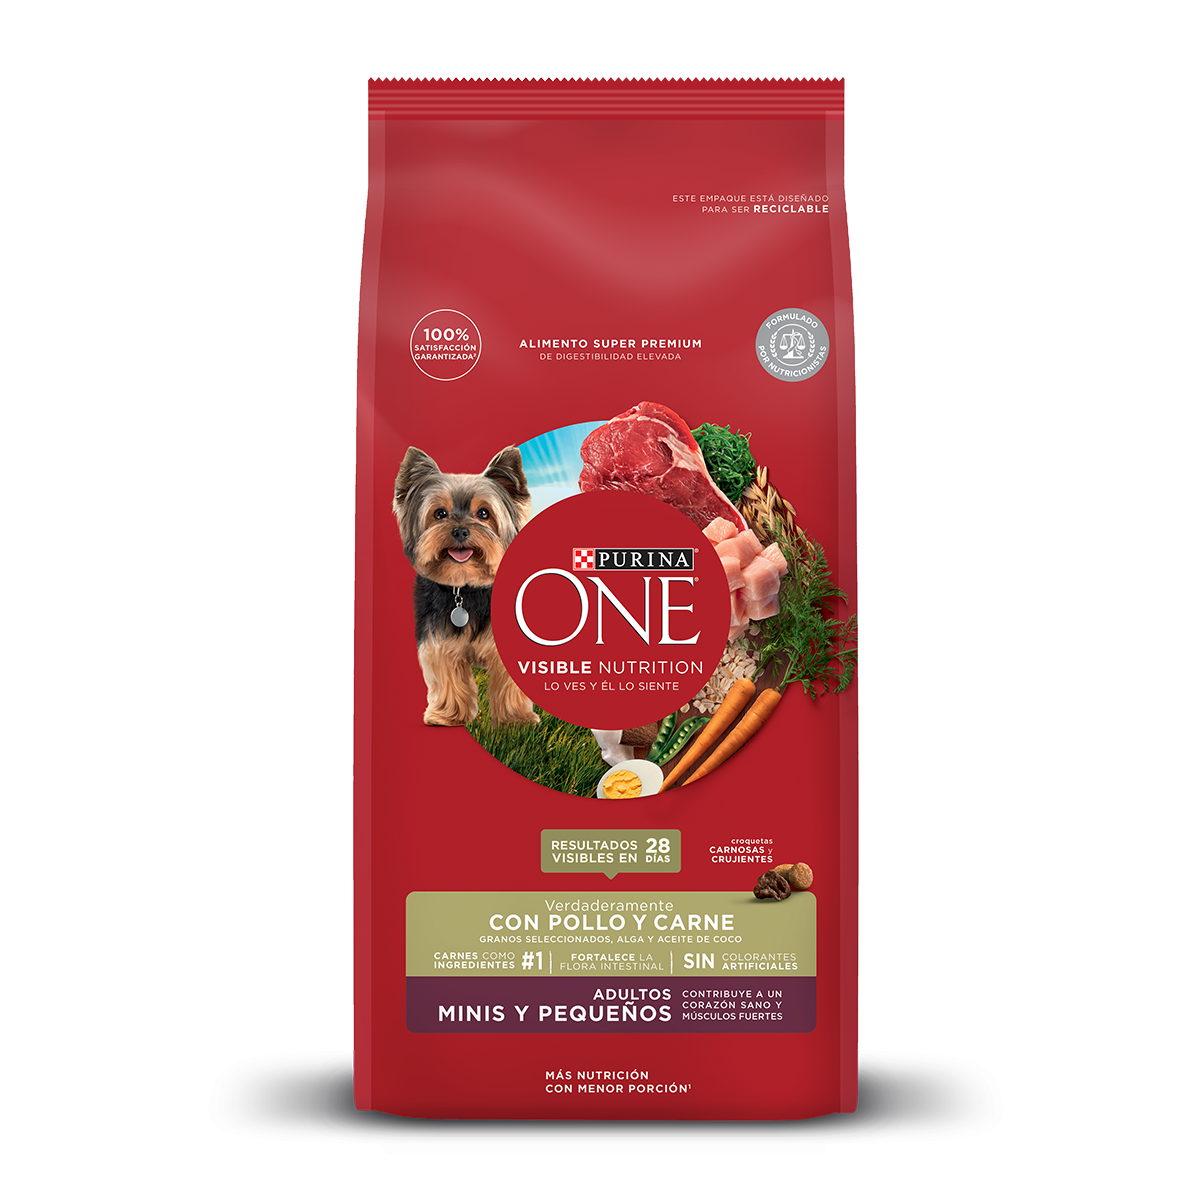 Purina-One-Adulto-Mini-y-Peque%C3%B1o-Carne-01.png